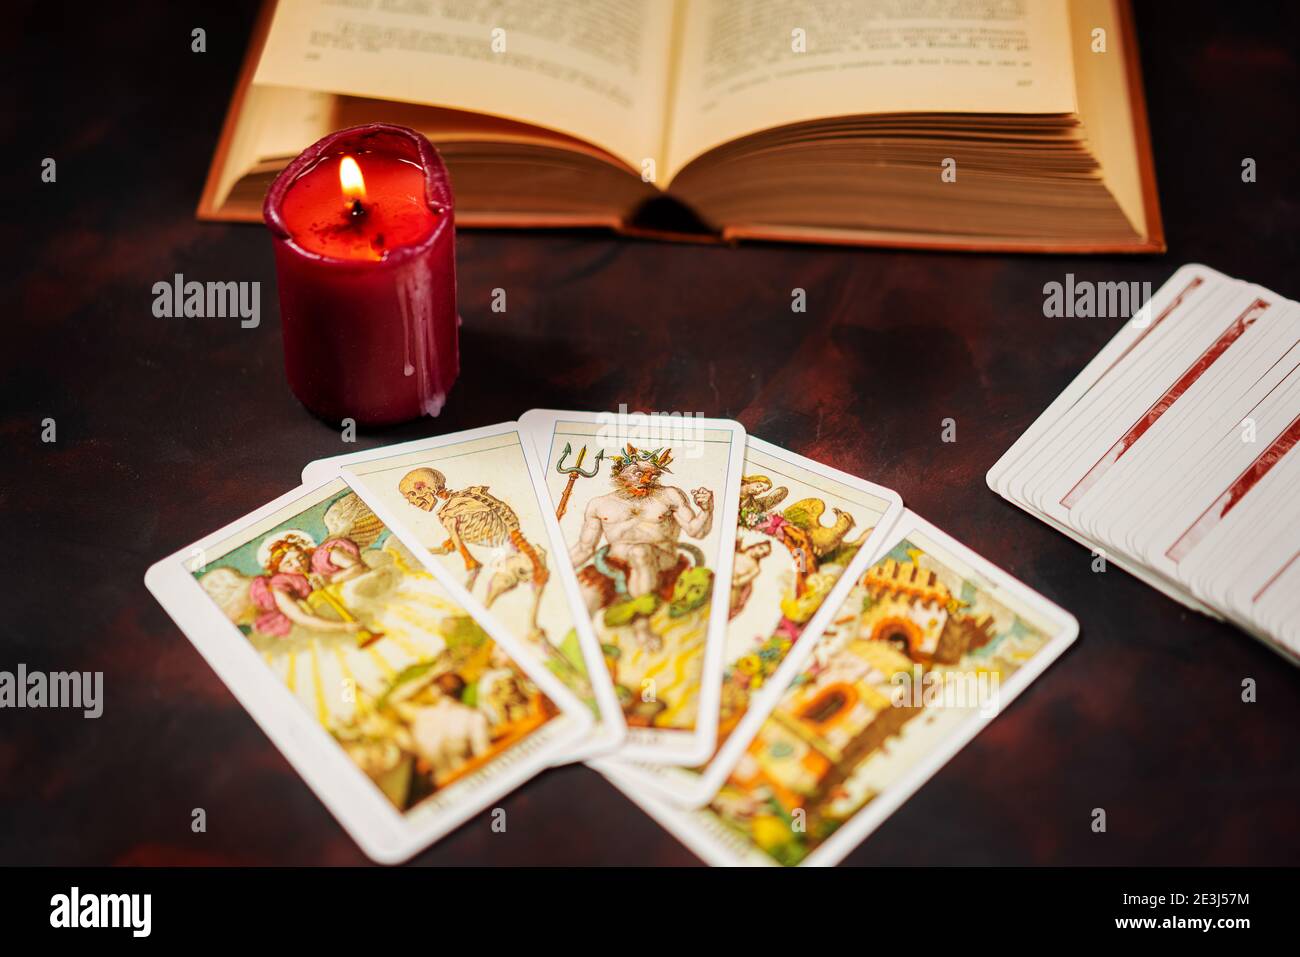 Blank Tarot Cards, Divination Deck, Oracle Cards